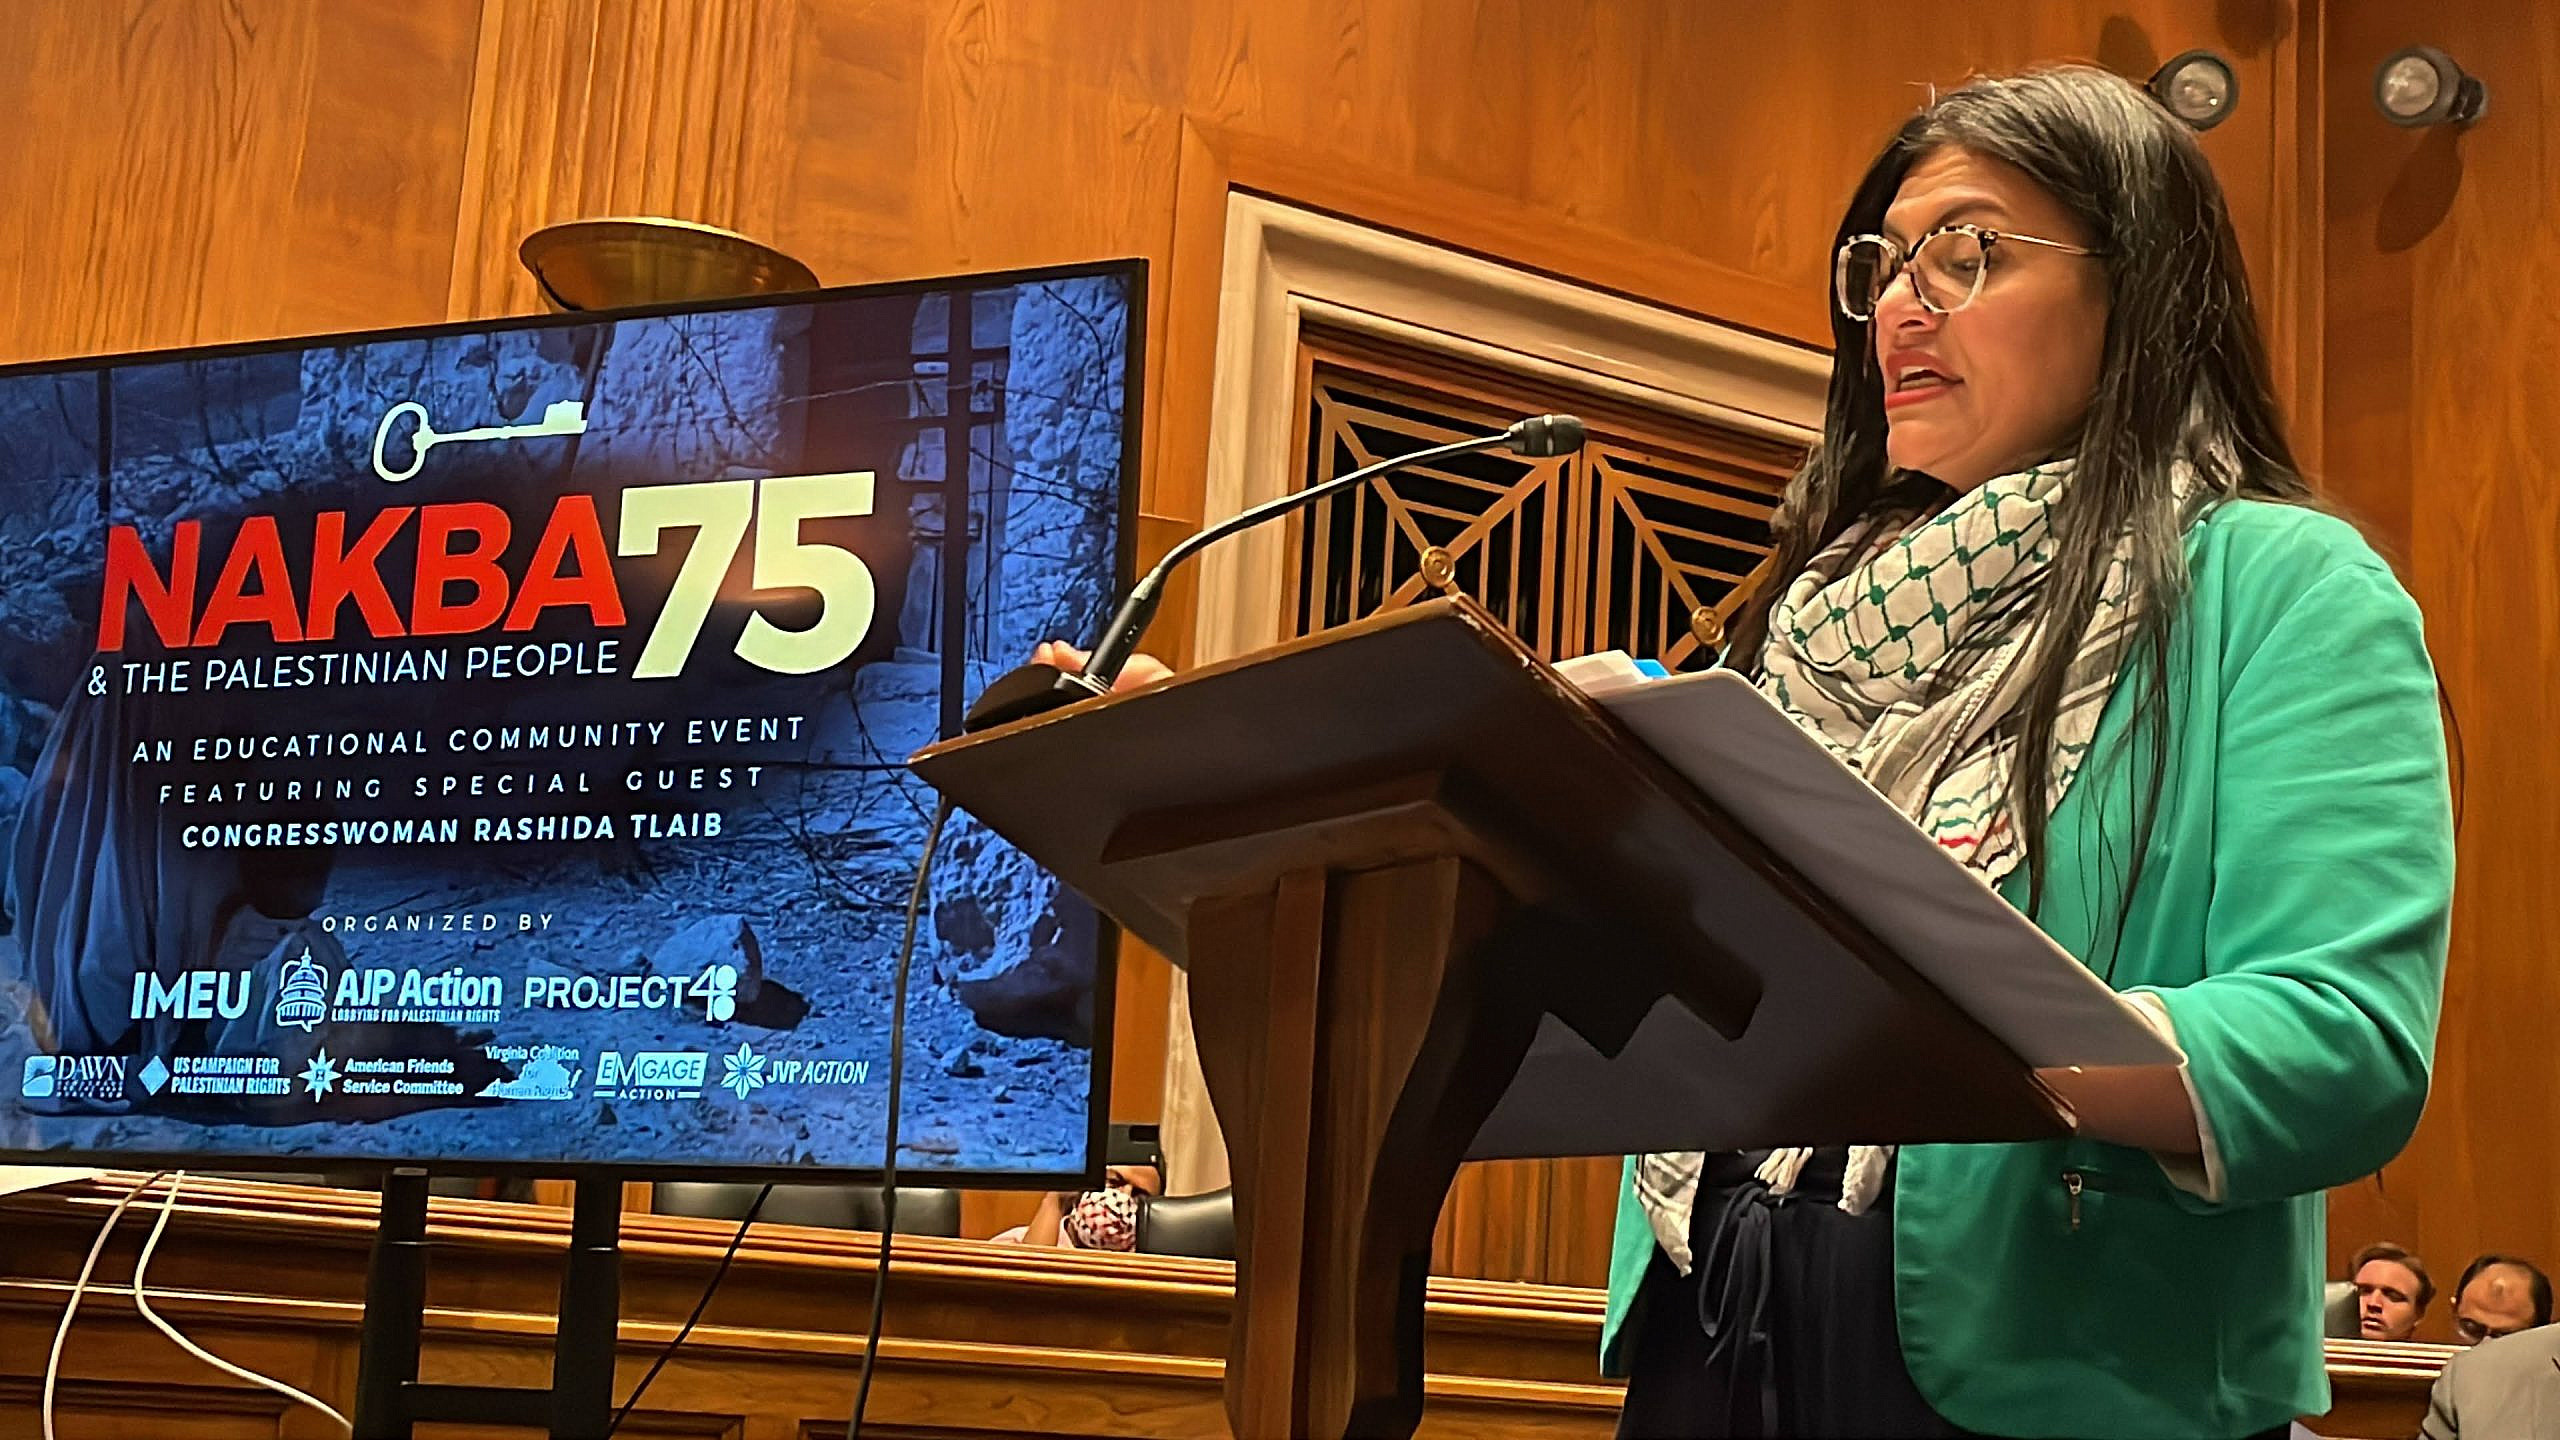 Rep. Rashida Tlaib speaking an event commemorating the 75th anniversary of the Nakba in Congress, Washington DC, May 10, 2023. (Courtesy of IMEU)